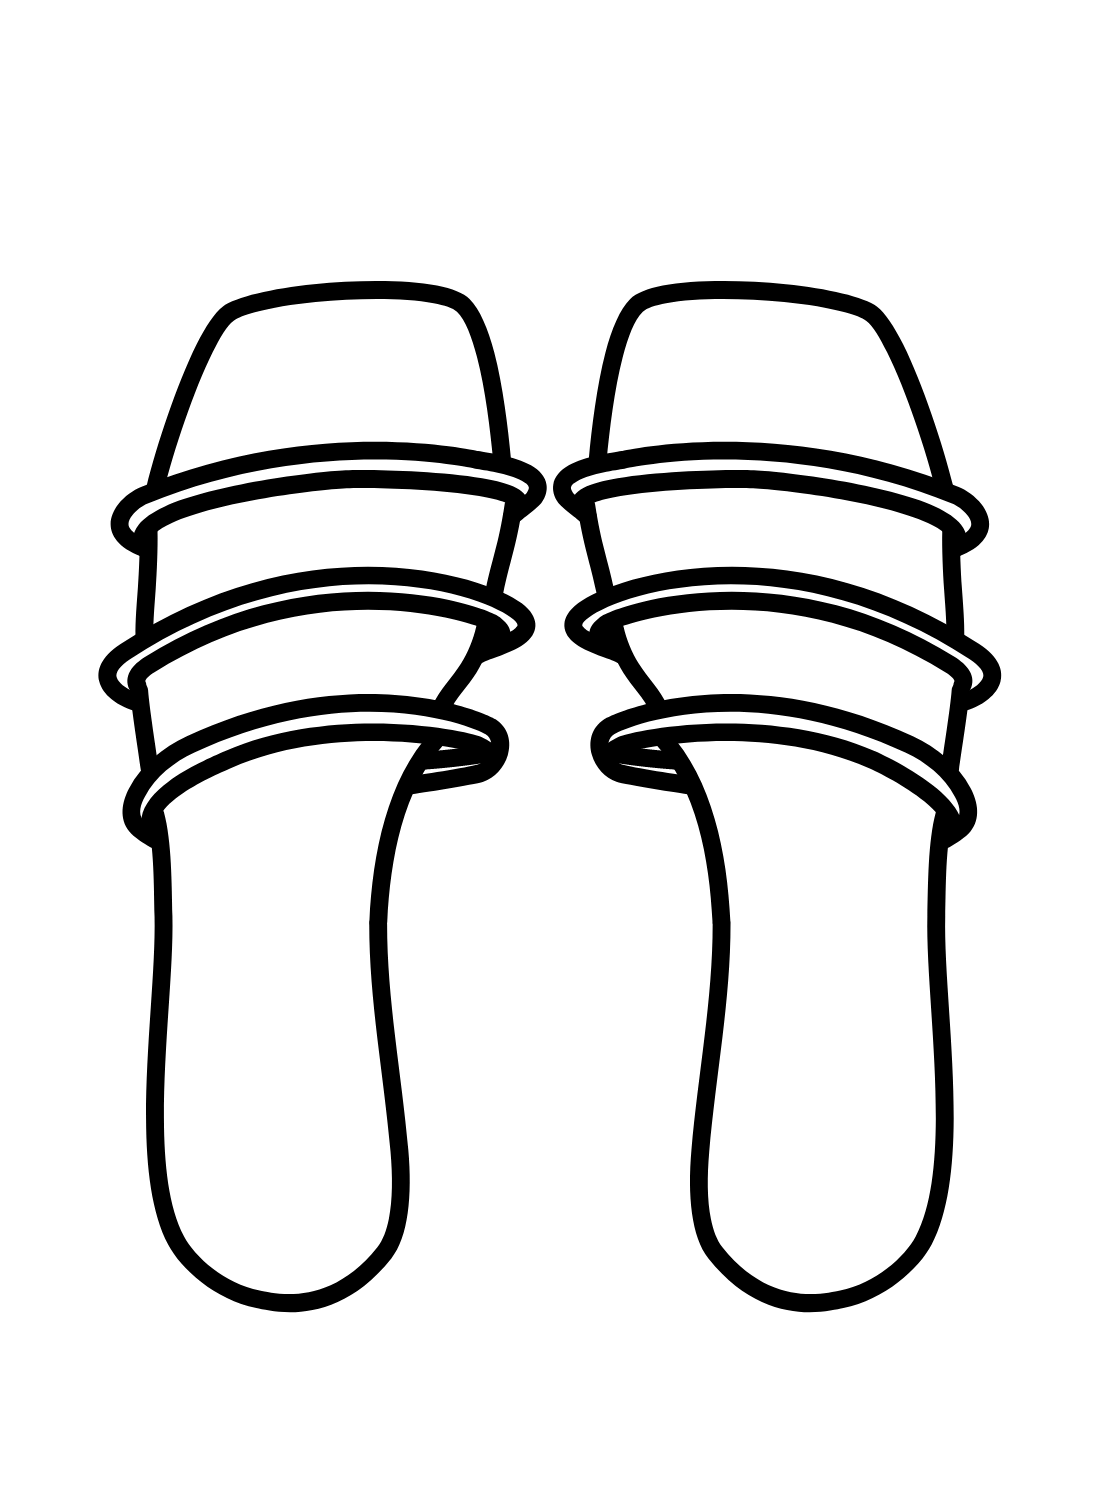 Sandals Printable from Sandals